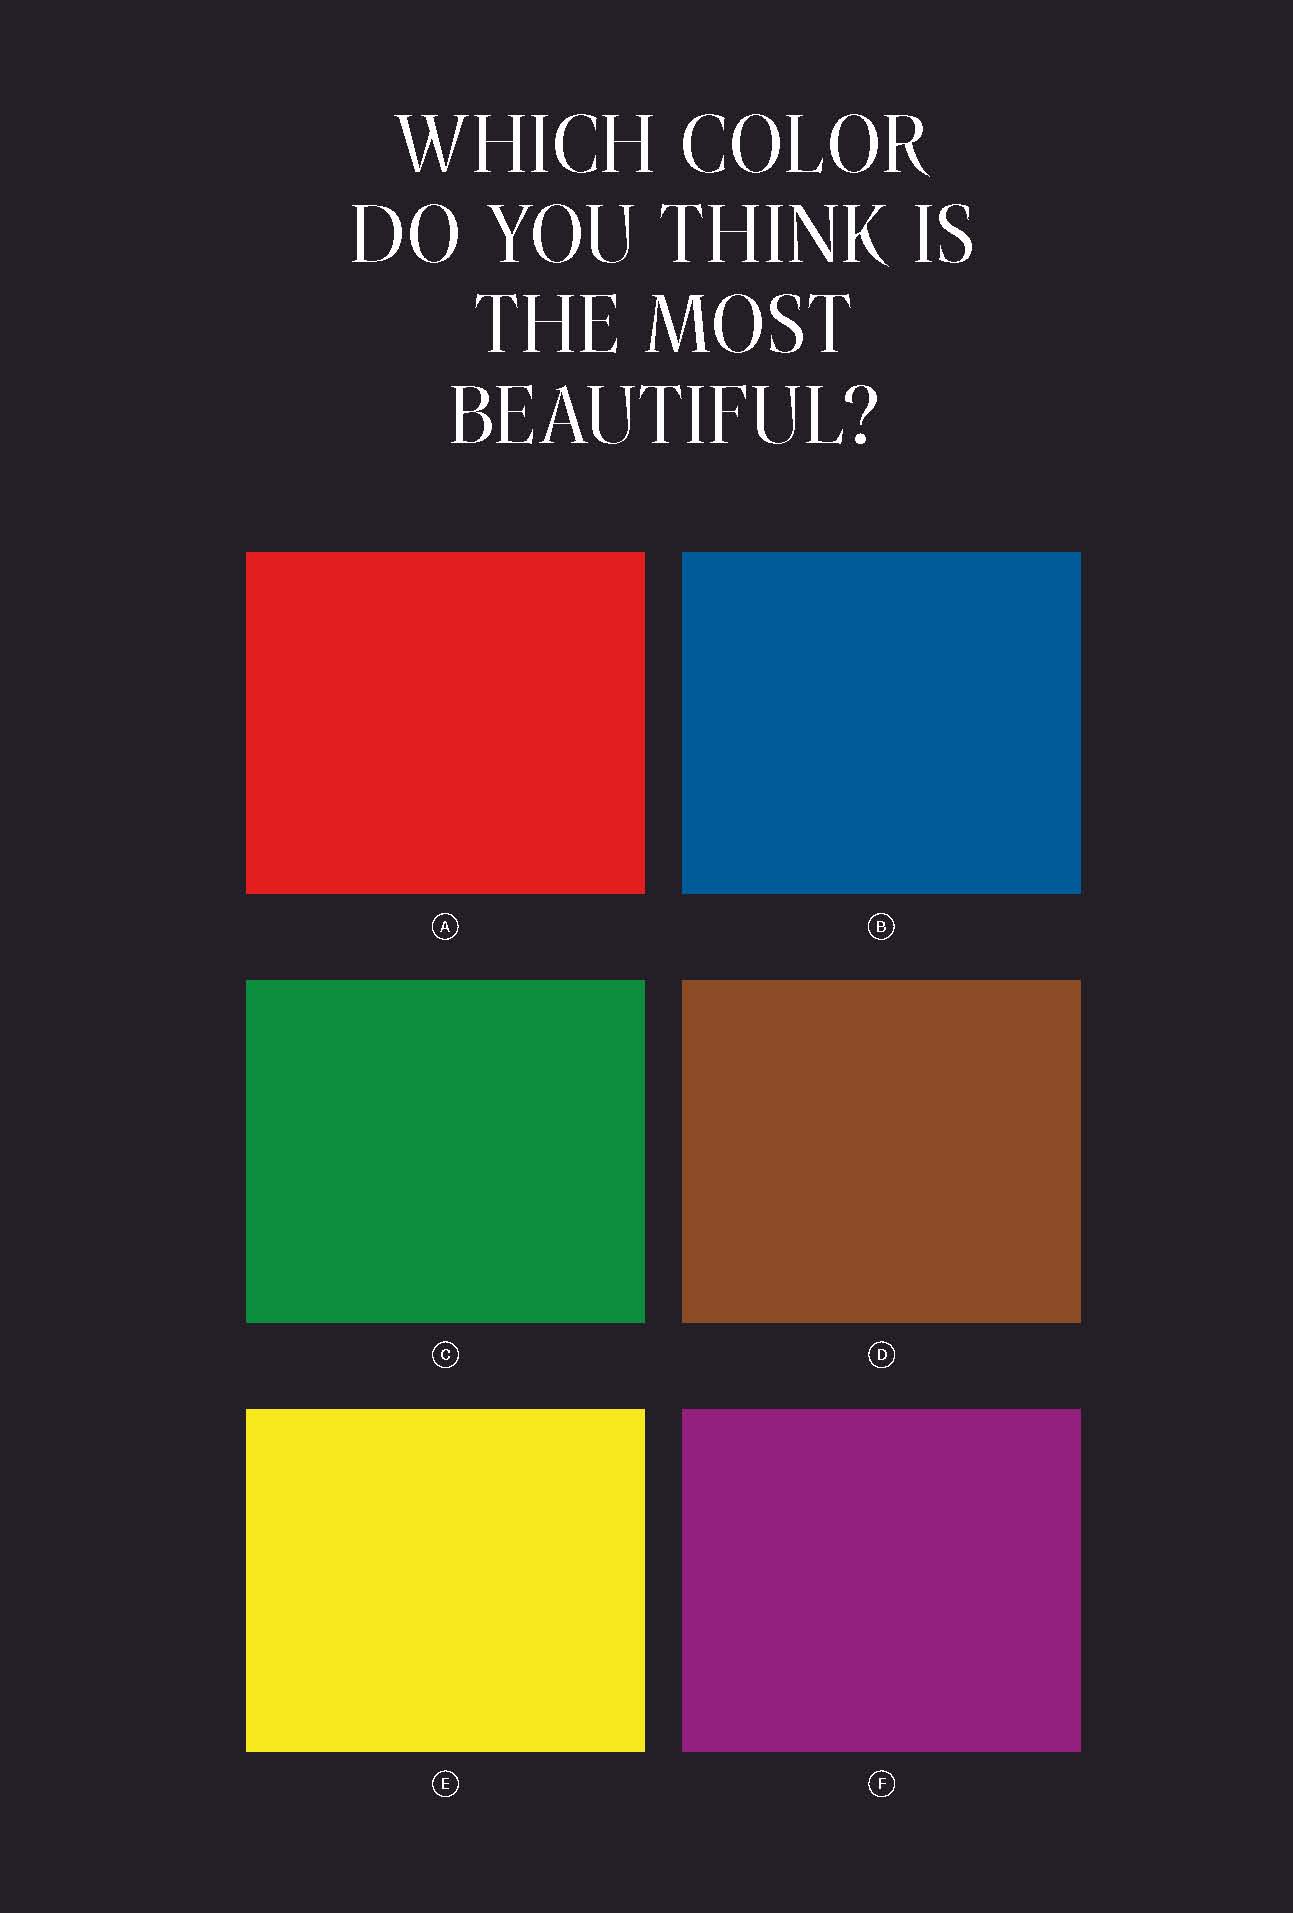 Survey question: Which Color Do You Think is the Most Beautiful? Picture credit: Â© Sagmeister & Walsh